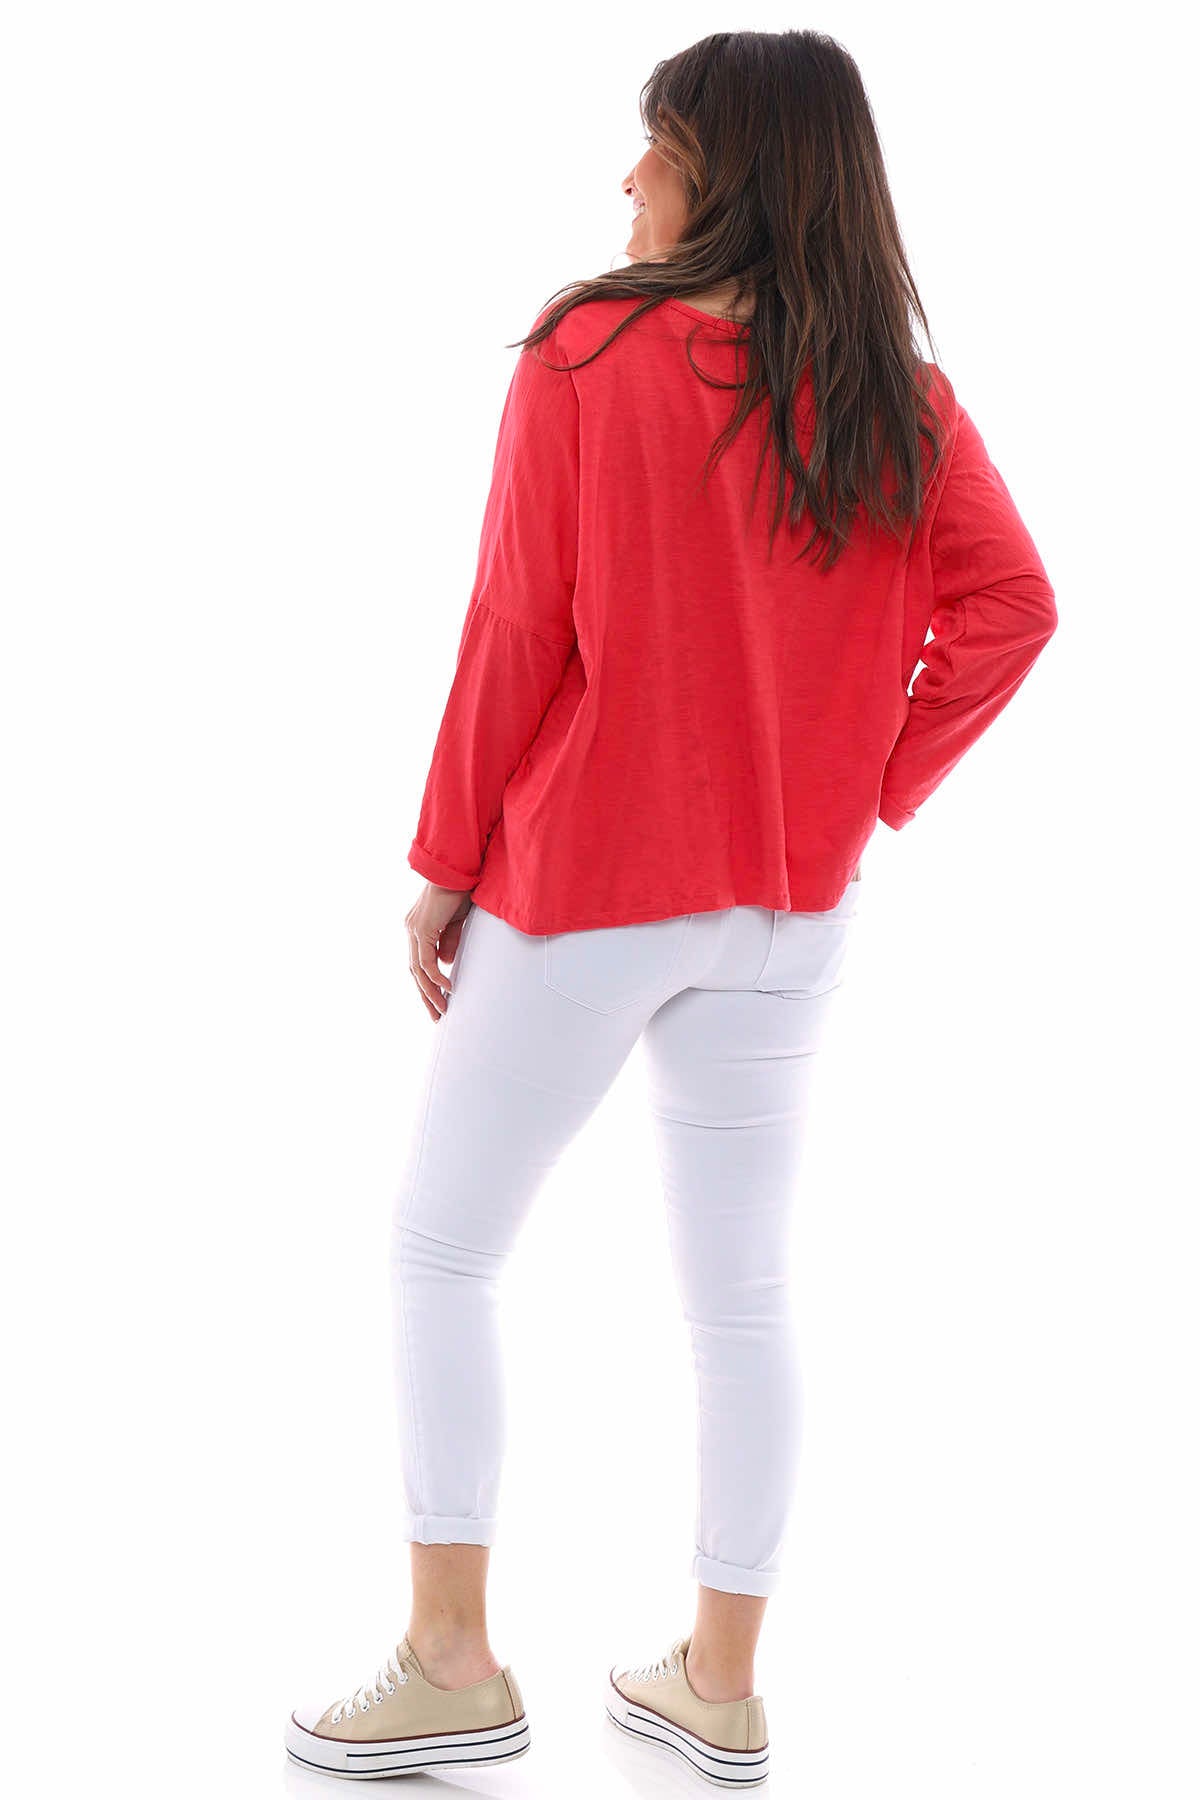 Made With Love Emma Pocket Top Red